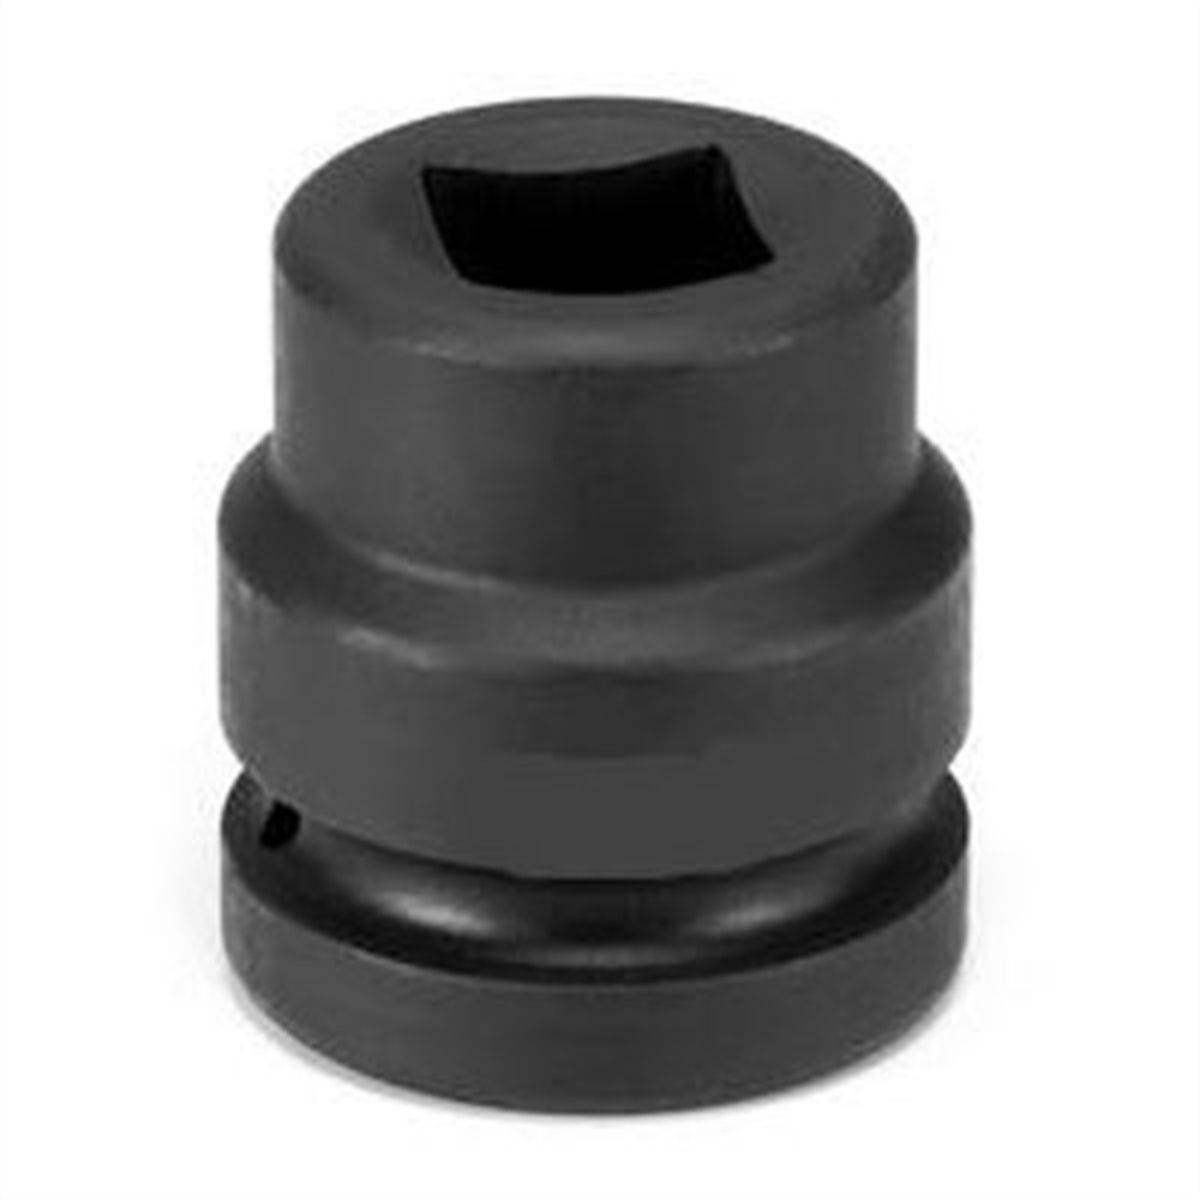 21mm 4-Point (Square) Standard Length 1" Drive Impact Socket